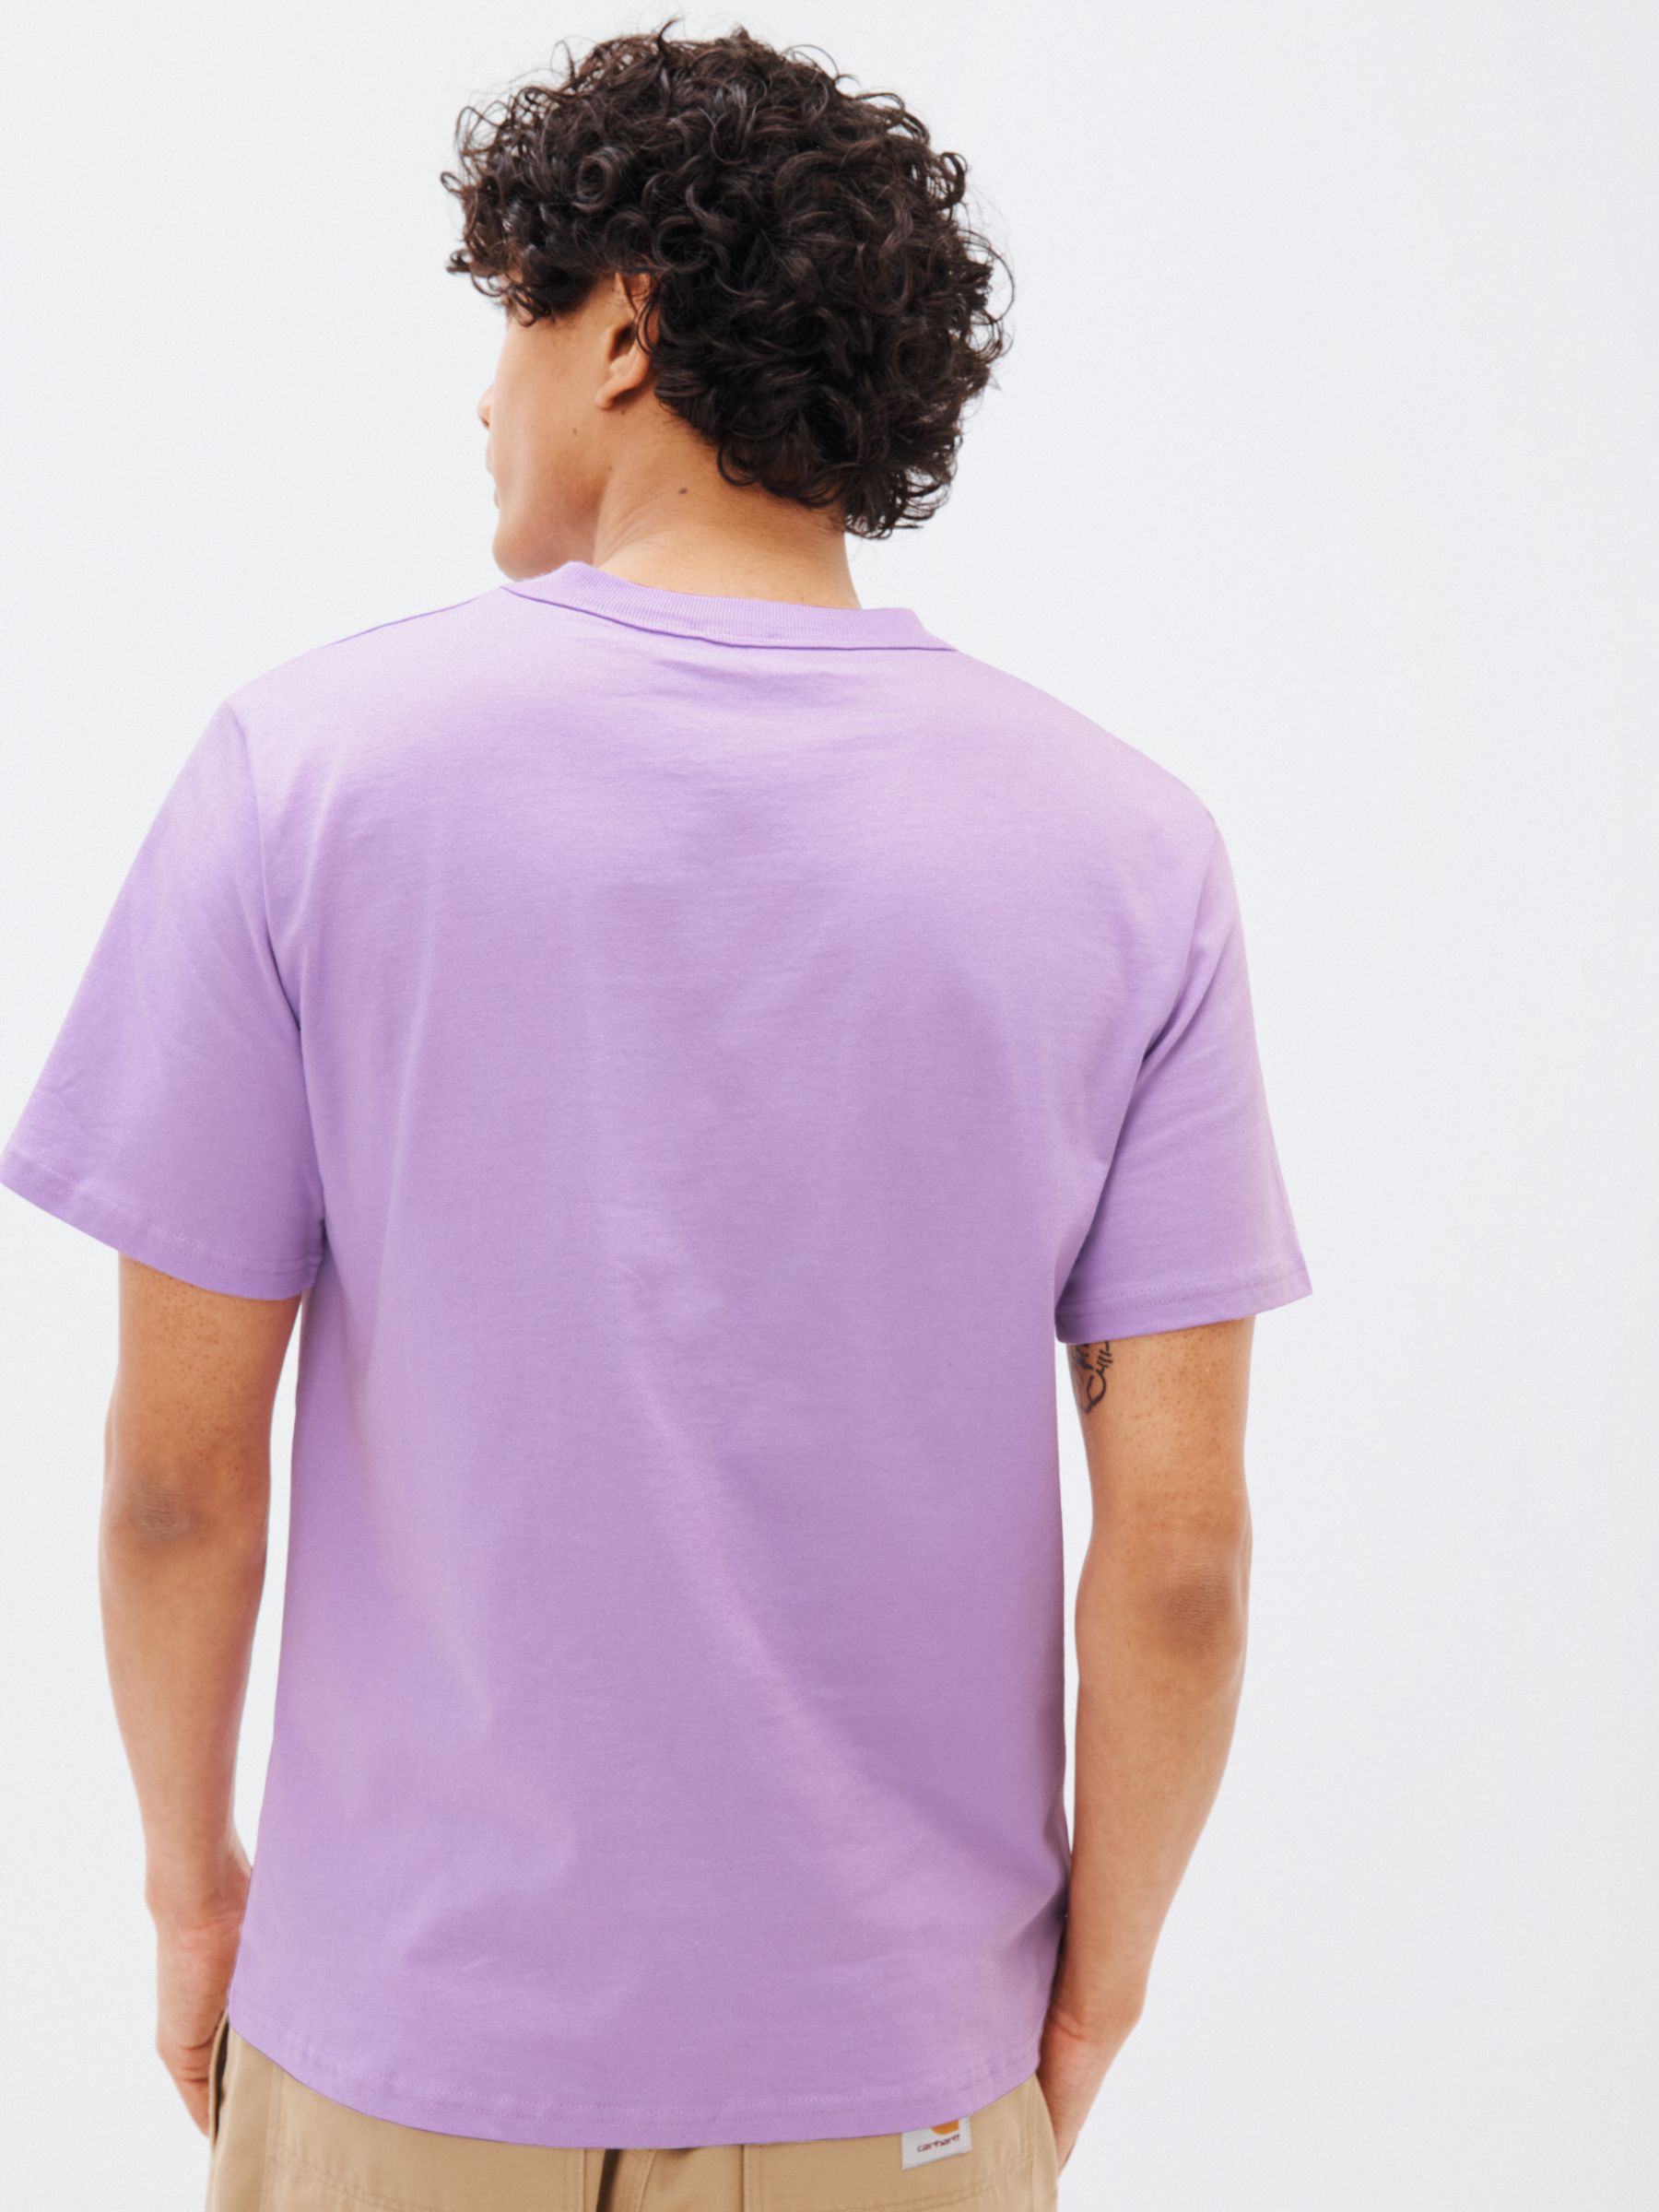 Armor Lux Heritage Cotton T-Shirt, Pastel Lilac at John Lewis & Partners